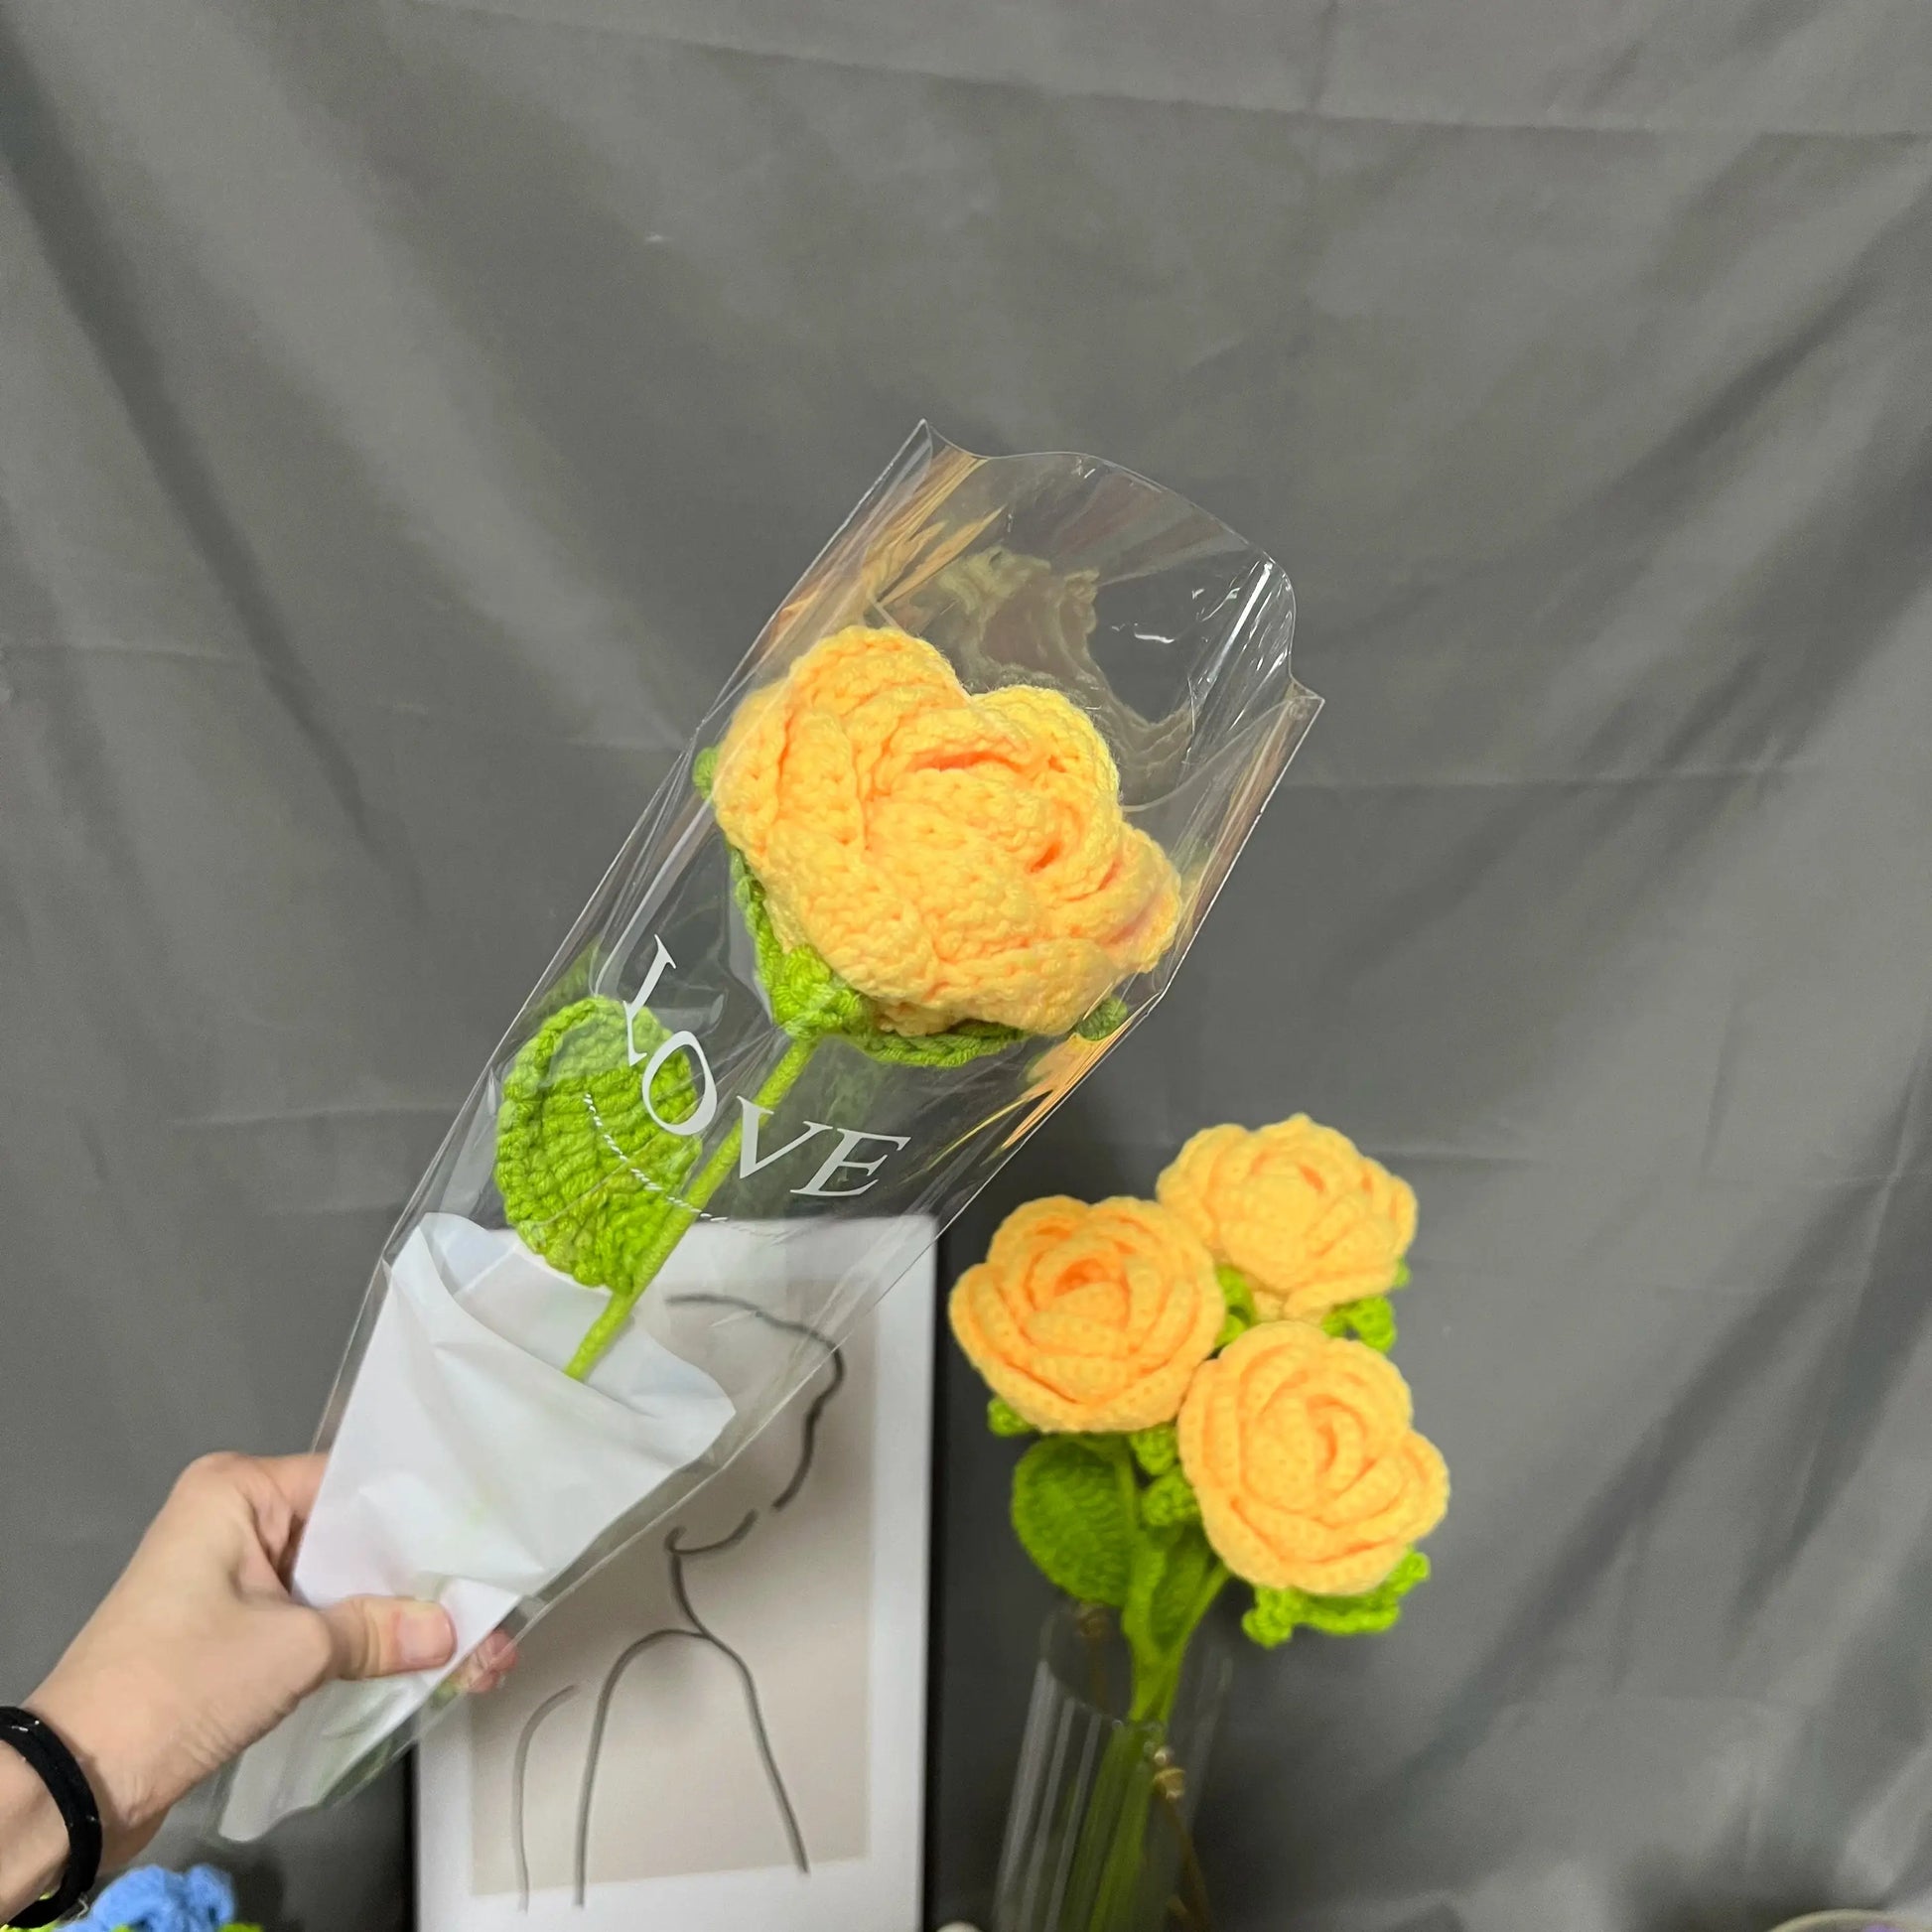 a person is holding a bouquet of flowers